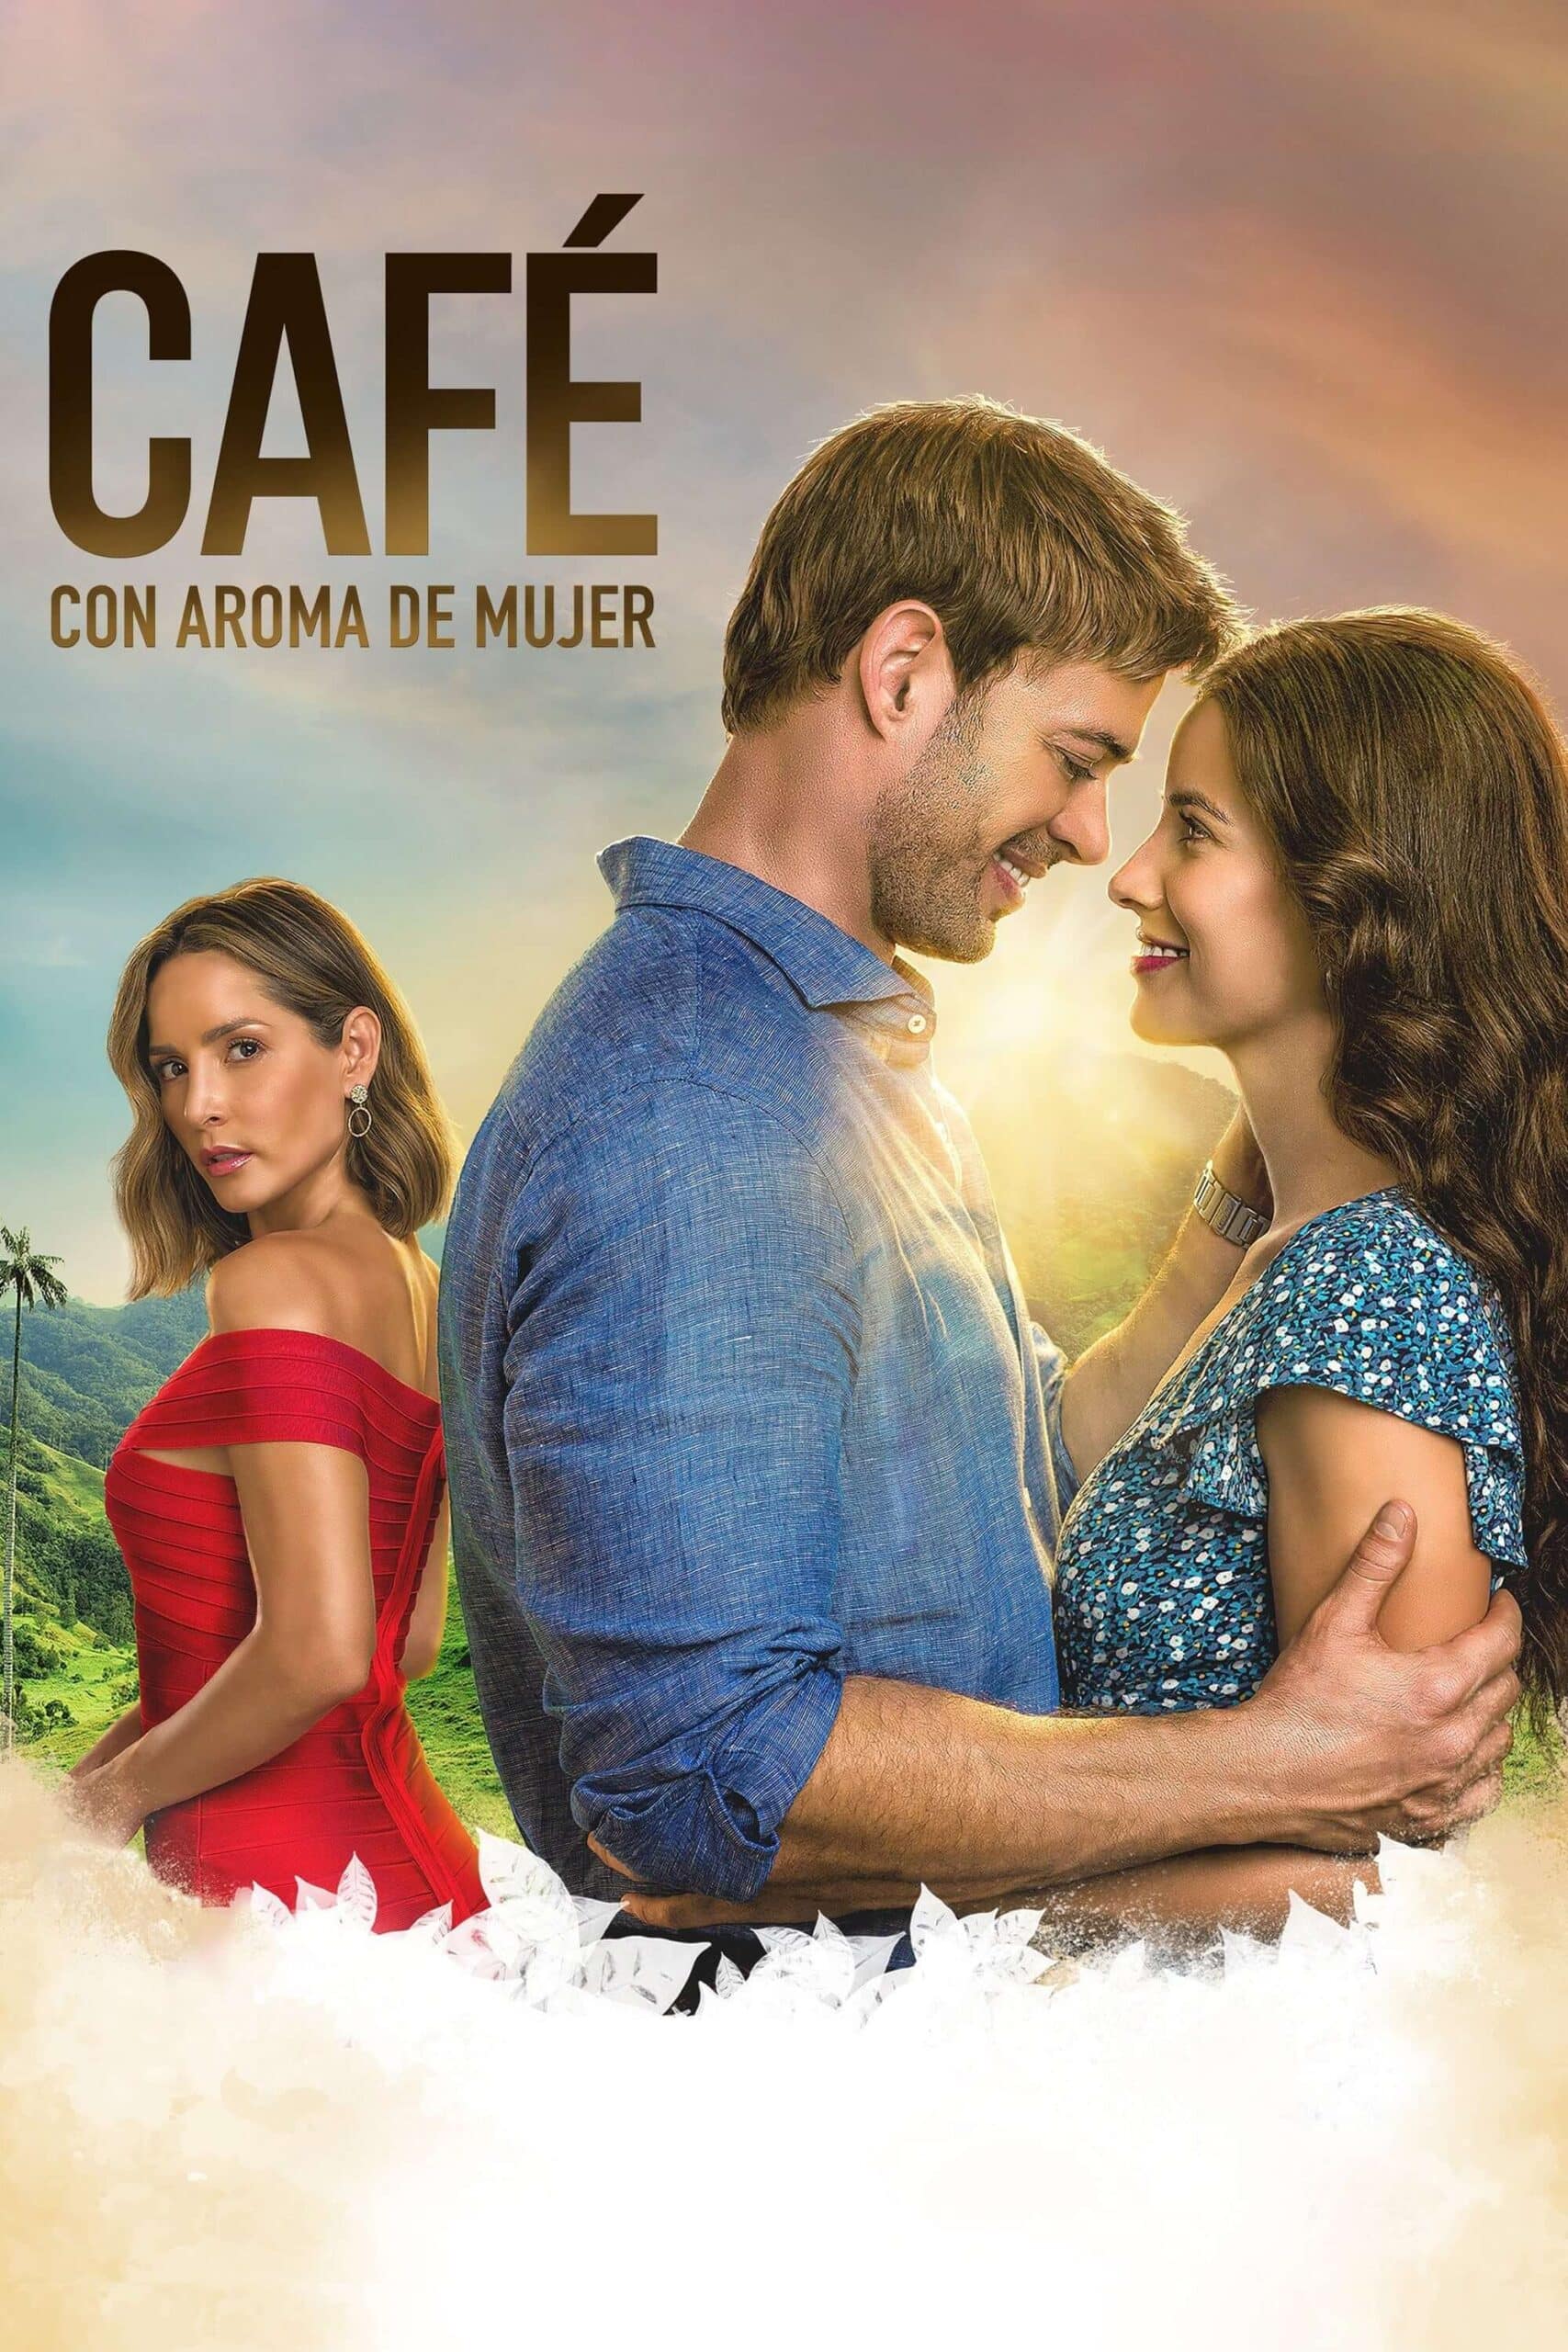 cafe con aroma de mujer 1 scaled